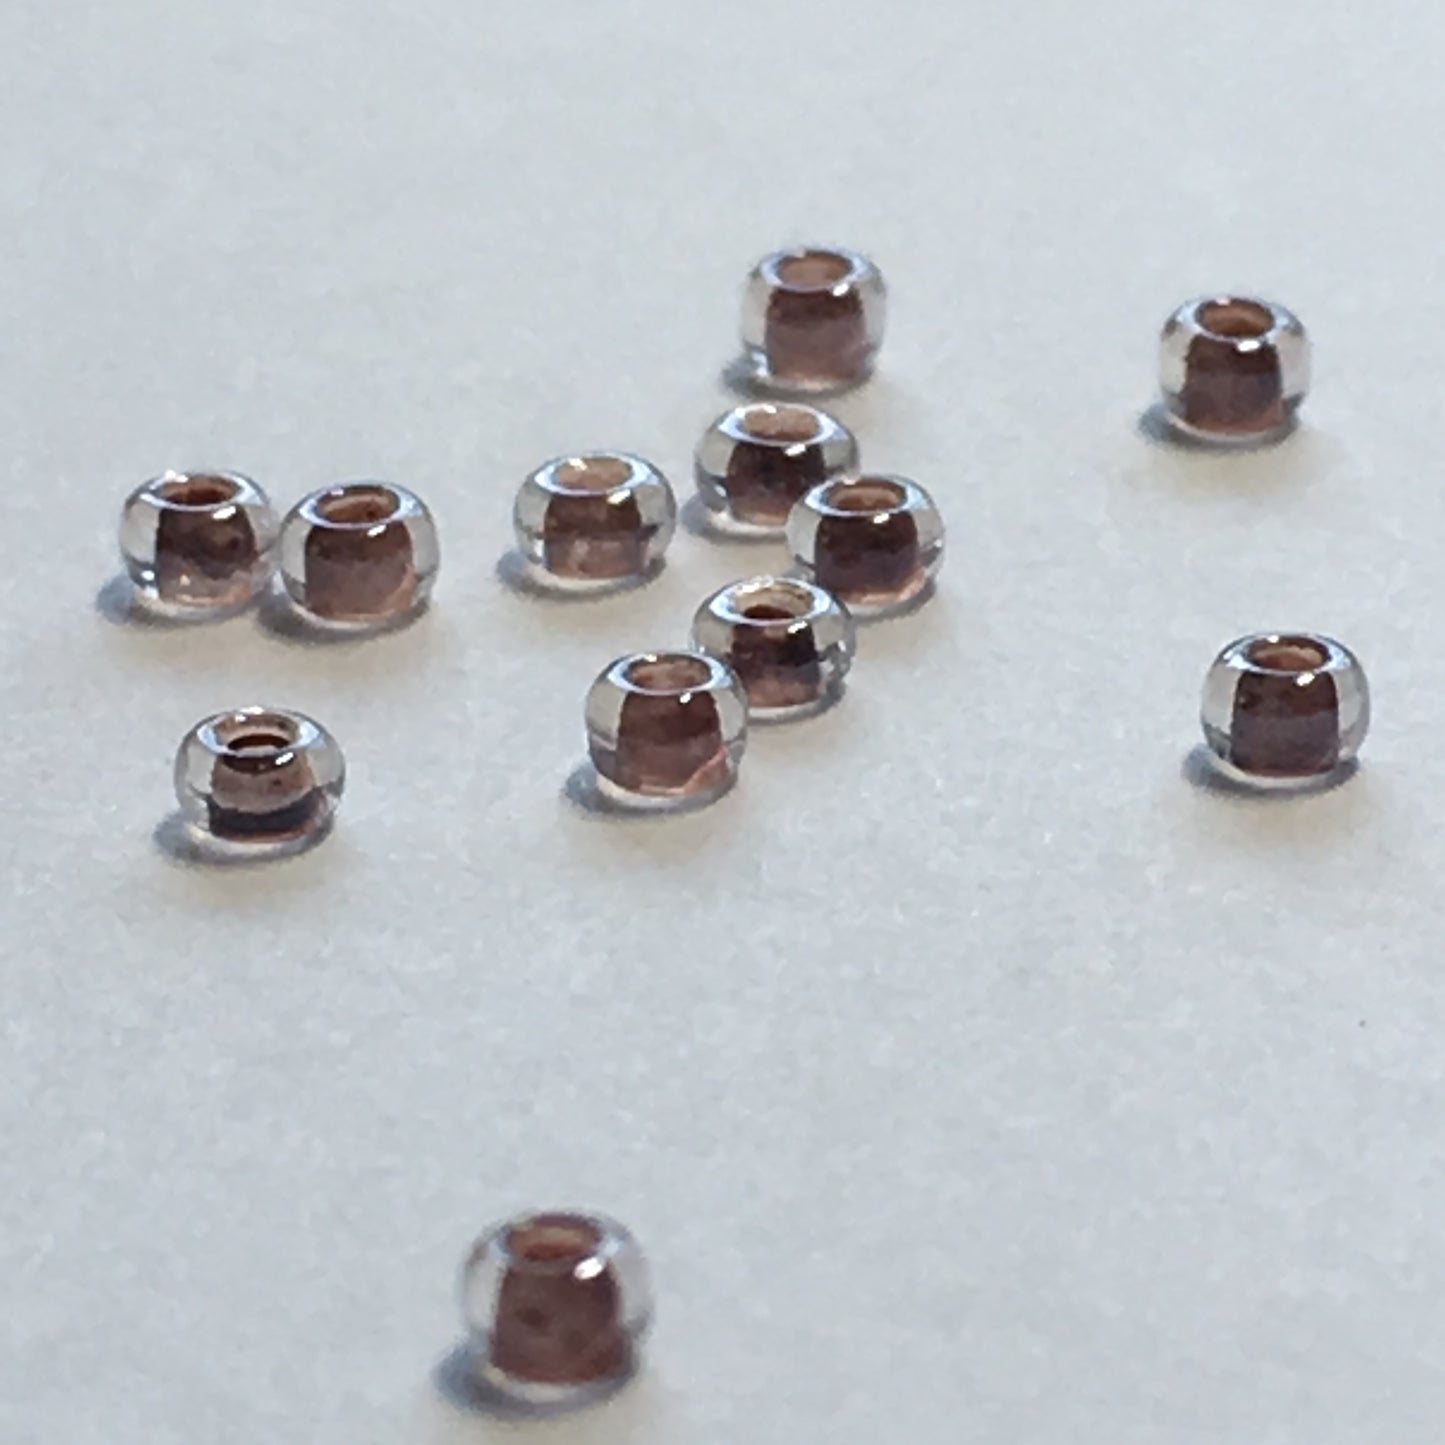 Preciosa Czech 038619 11/0 Brown Lined Crystal Seed Beads, 5 or 10 gm